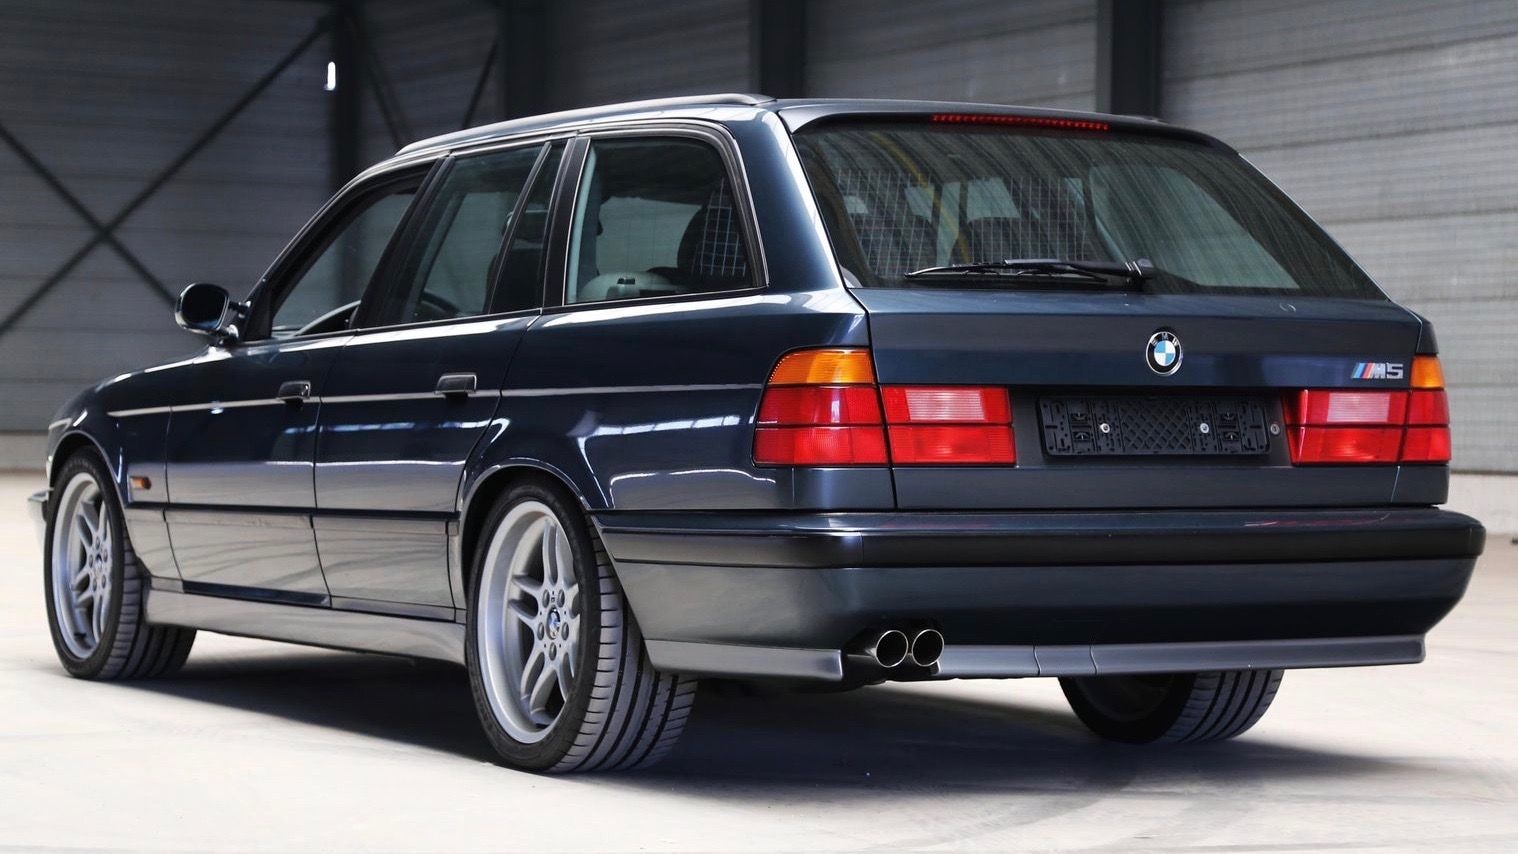 1995 BMW M5 Touring (Photo by Car Cave USA)